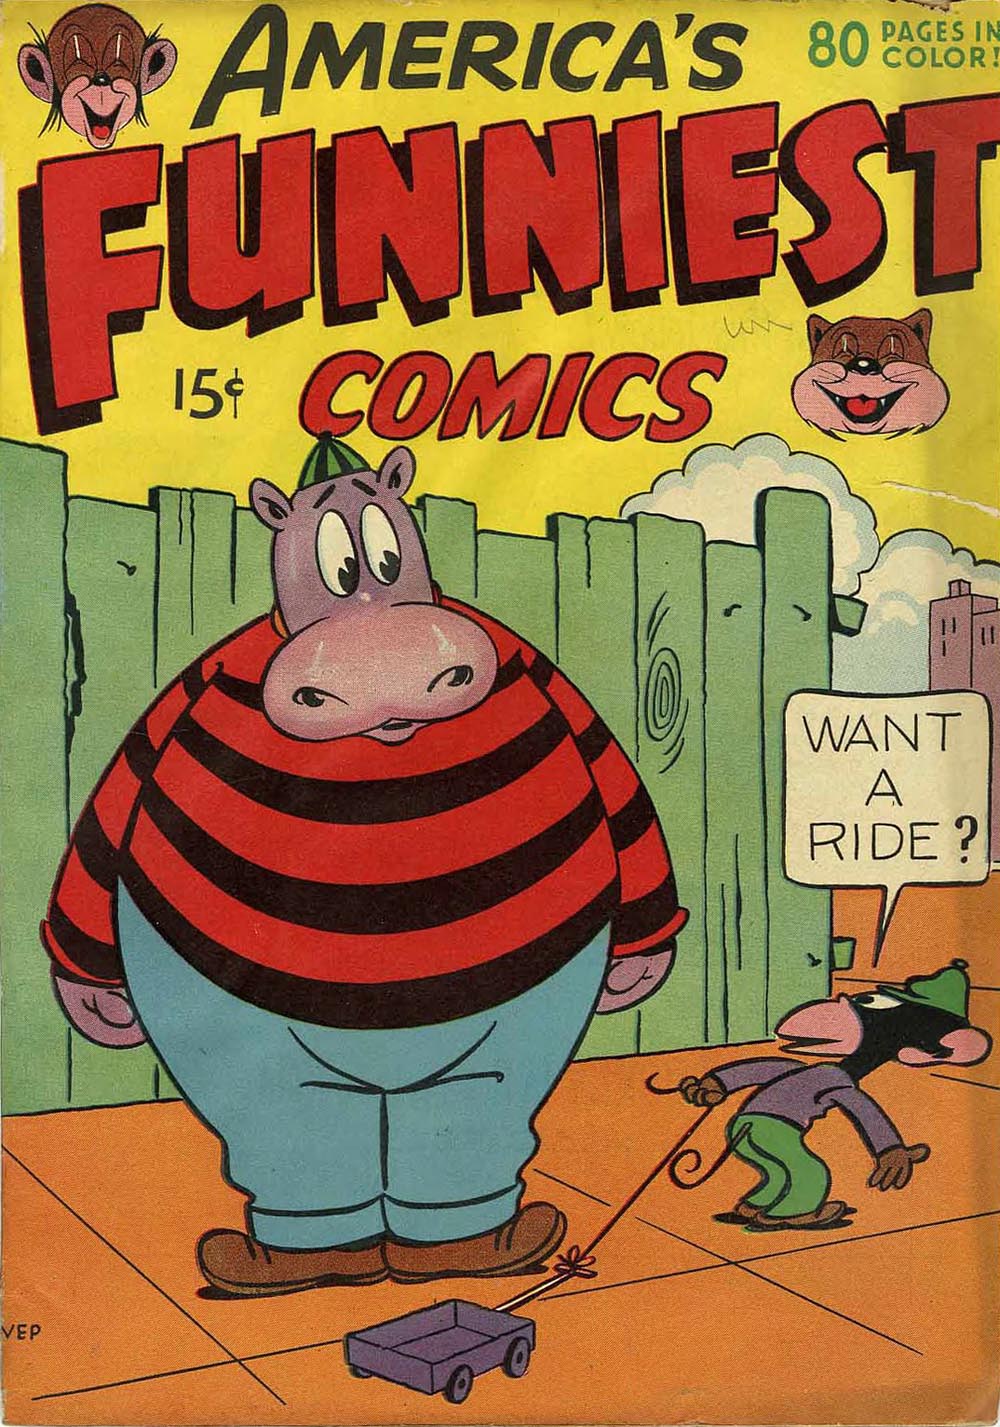 Inbetweens: Funny Animal Comic Book Covers - AnimationResources.org